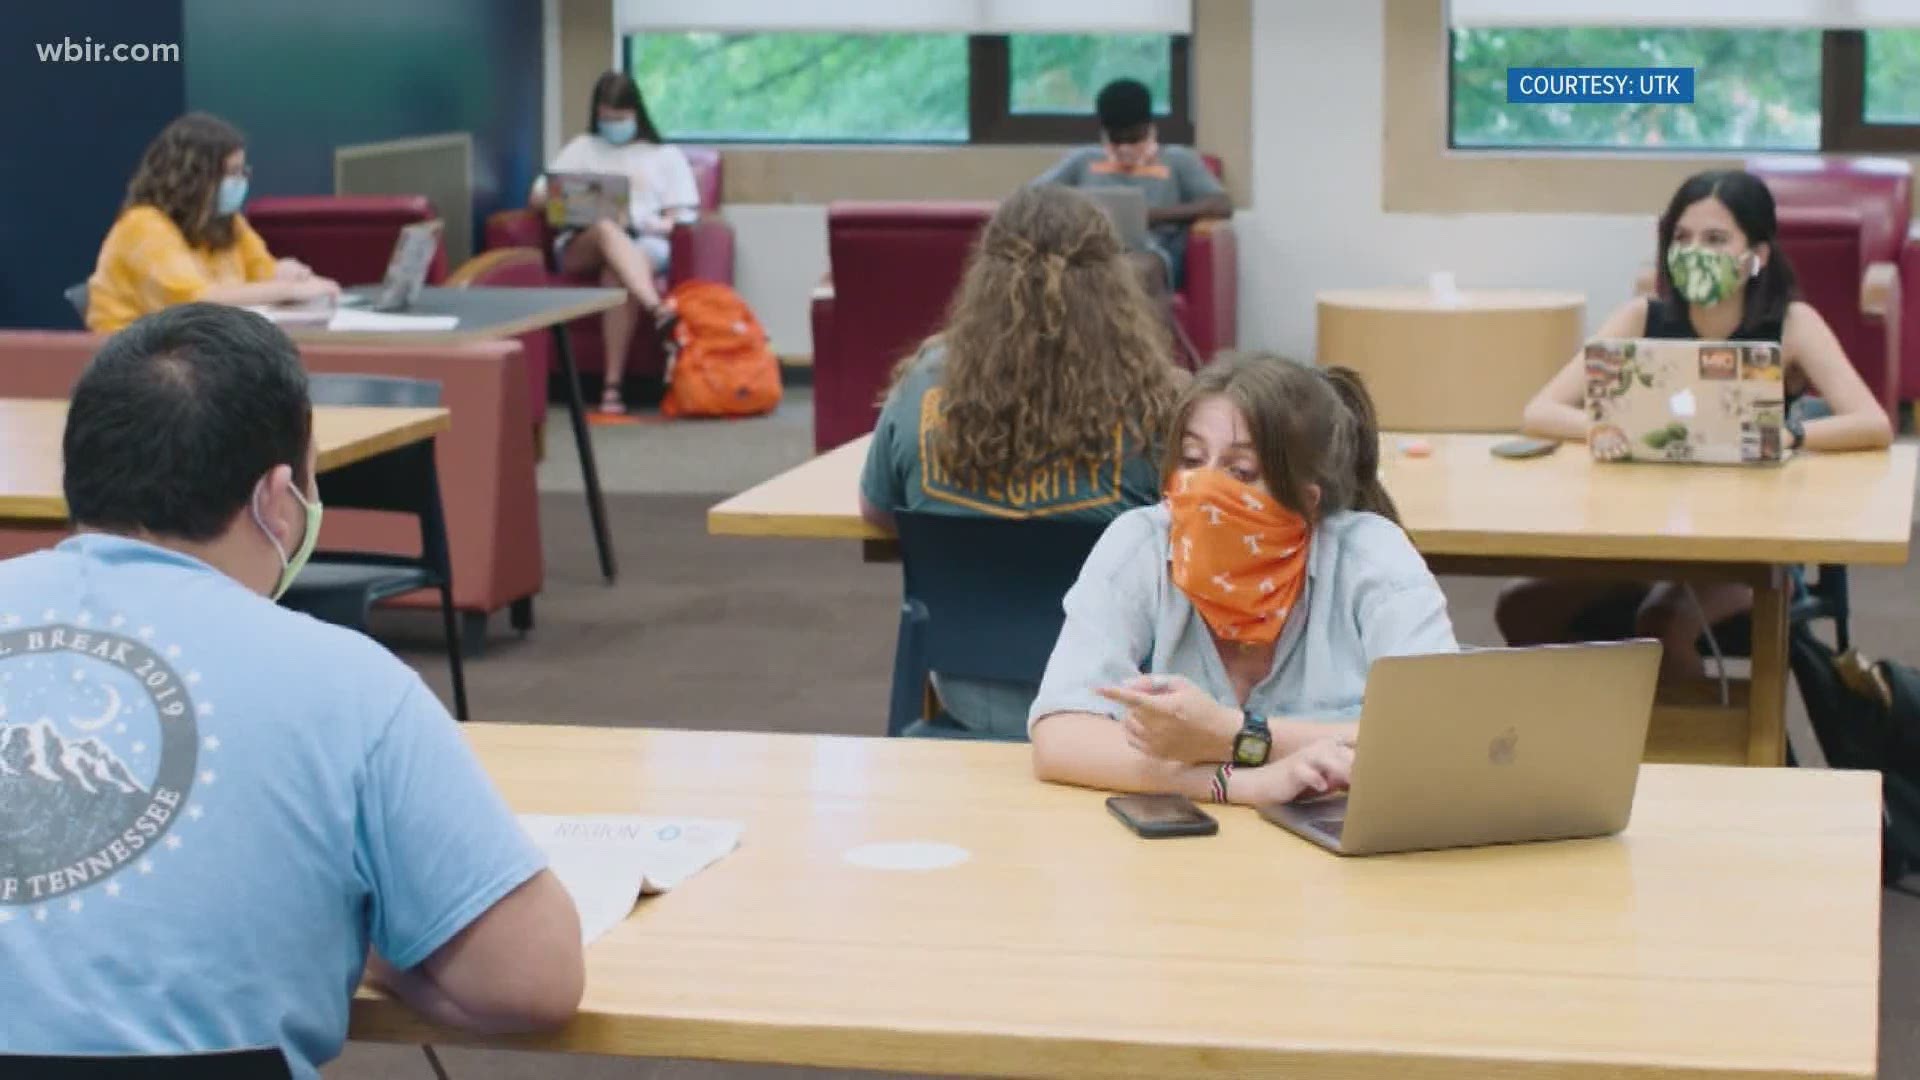 Many classes at UT will be a hybrid of online and in-person. The university says there will also be smaller class sizes in cleaner classrooms.